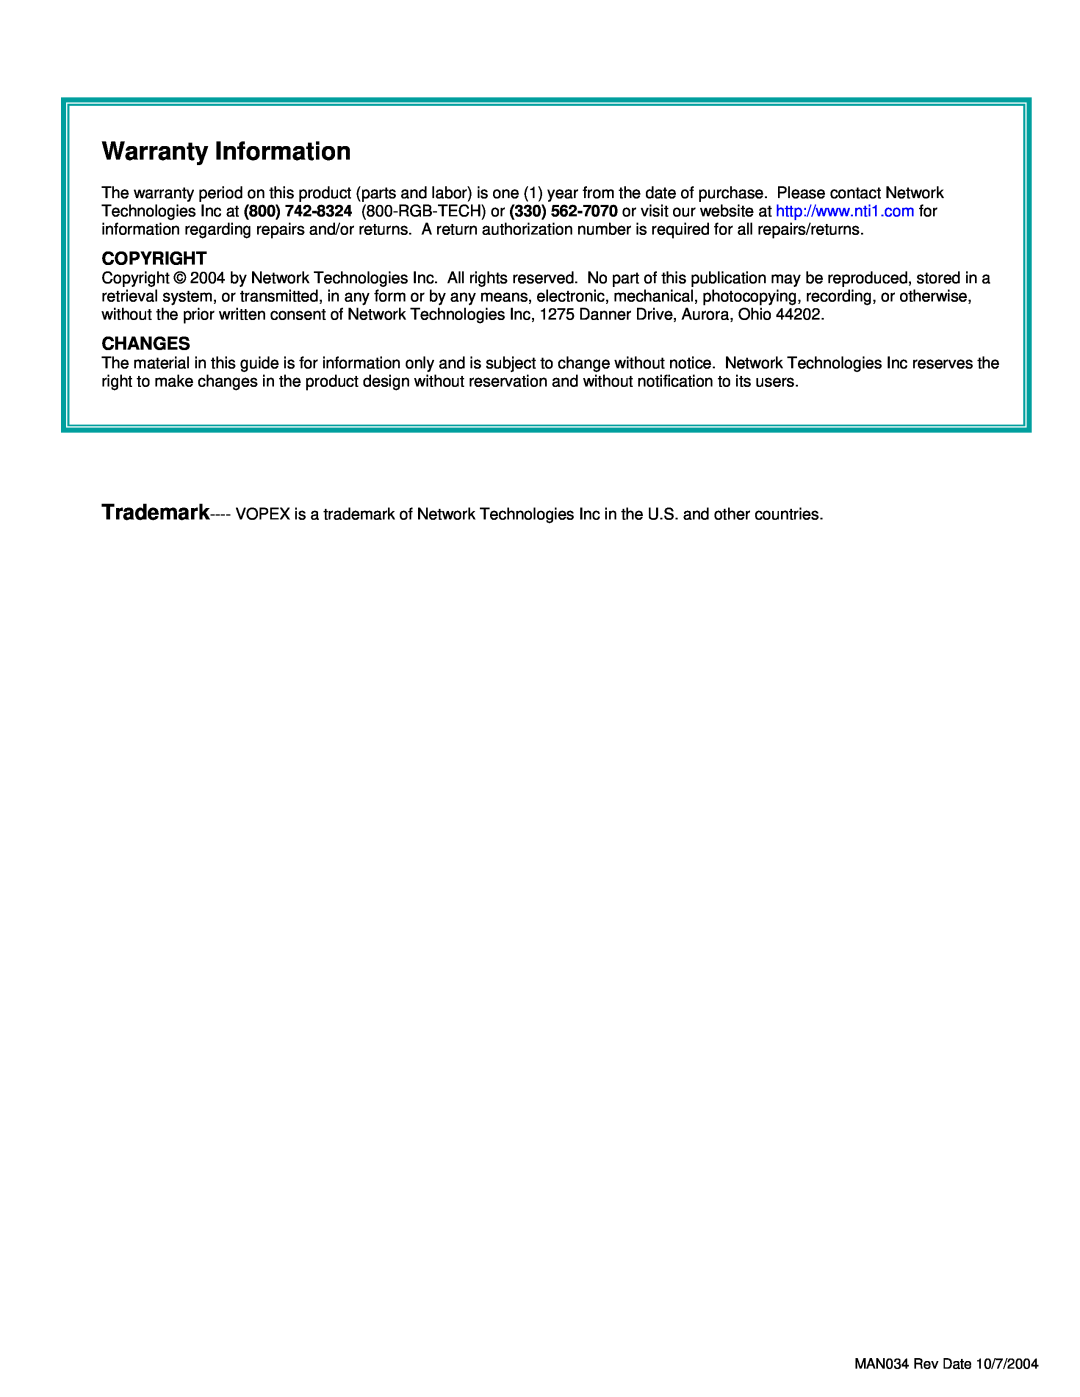 Network Technologies VOPEX-USBV operation manual Warranty Information, Copyright, Changes 